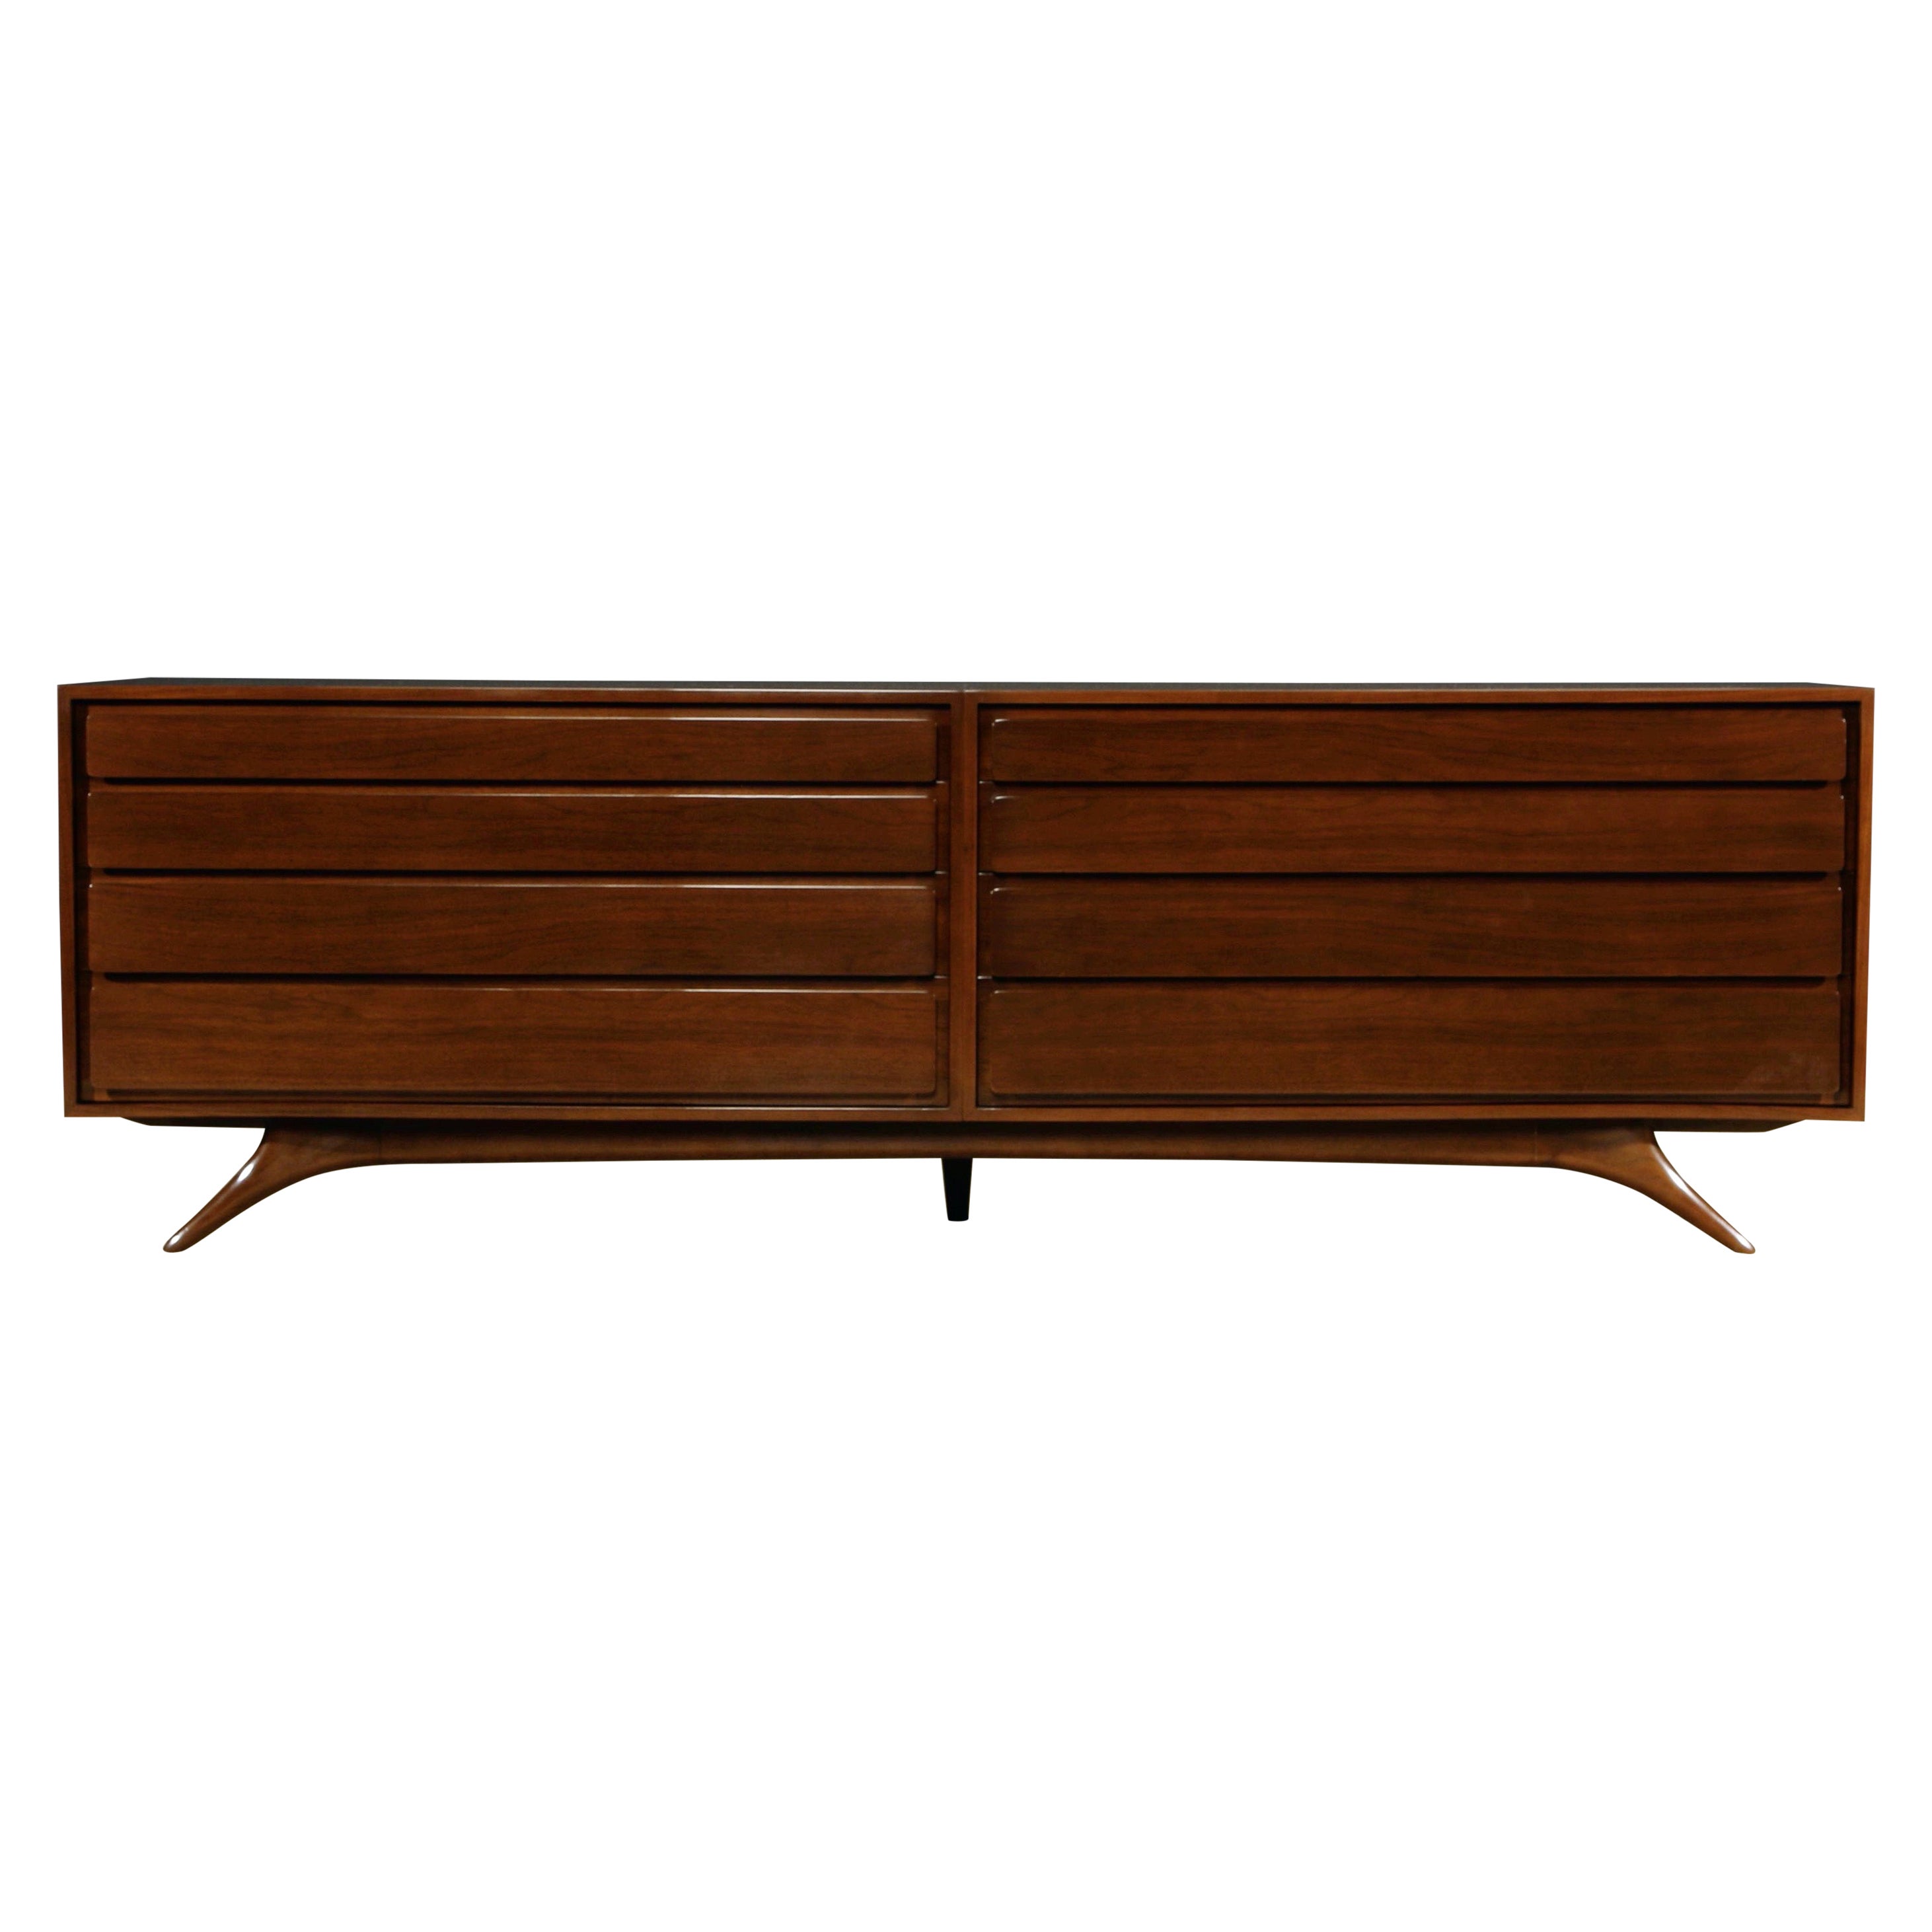 Important Double Dresser by Vladimir Kagan for Kagan-Dreyfuss, 1950s, Signed For Sale